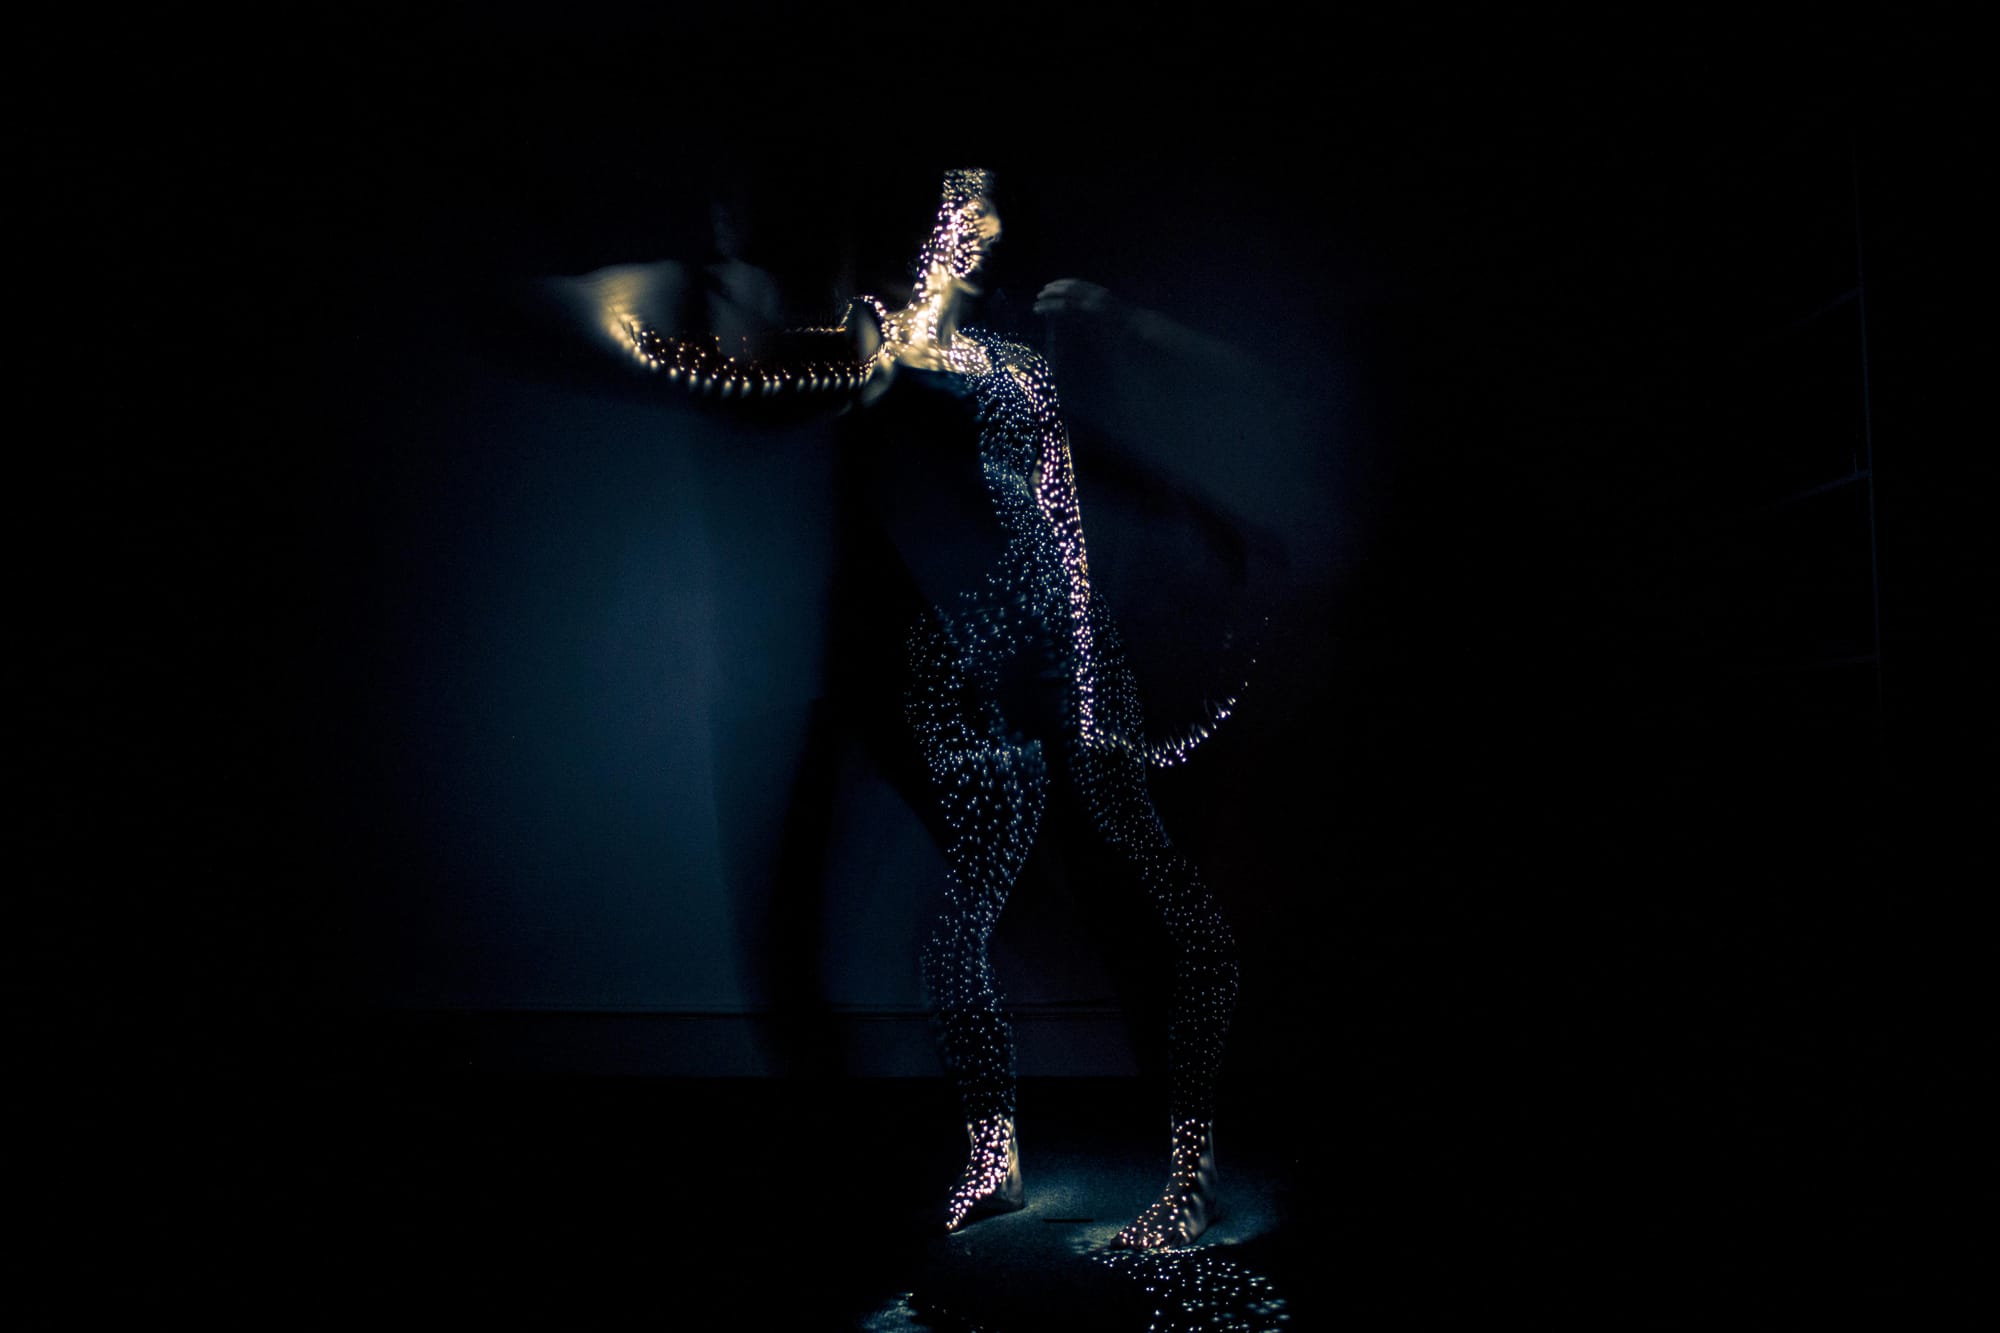 Long exposure photo of a person painting herself with a lightbrush